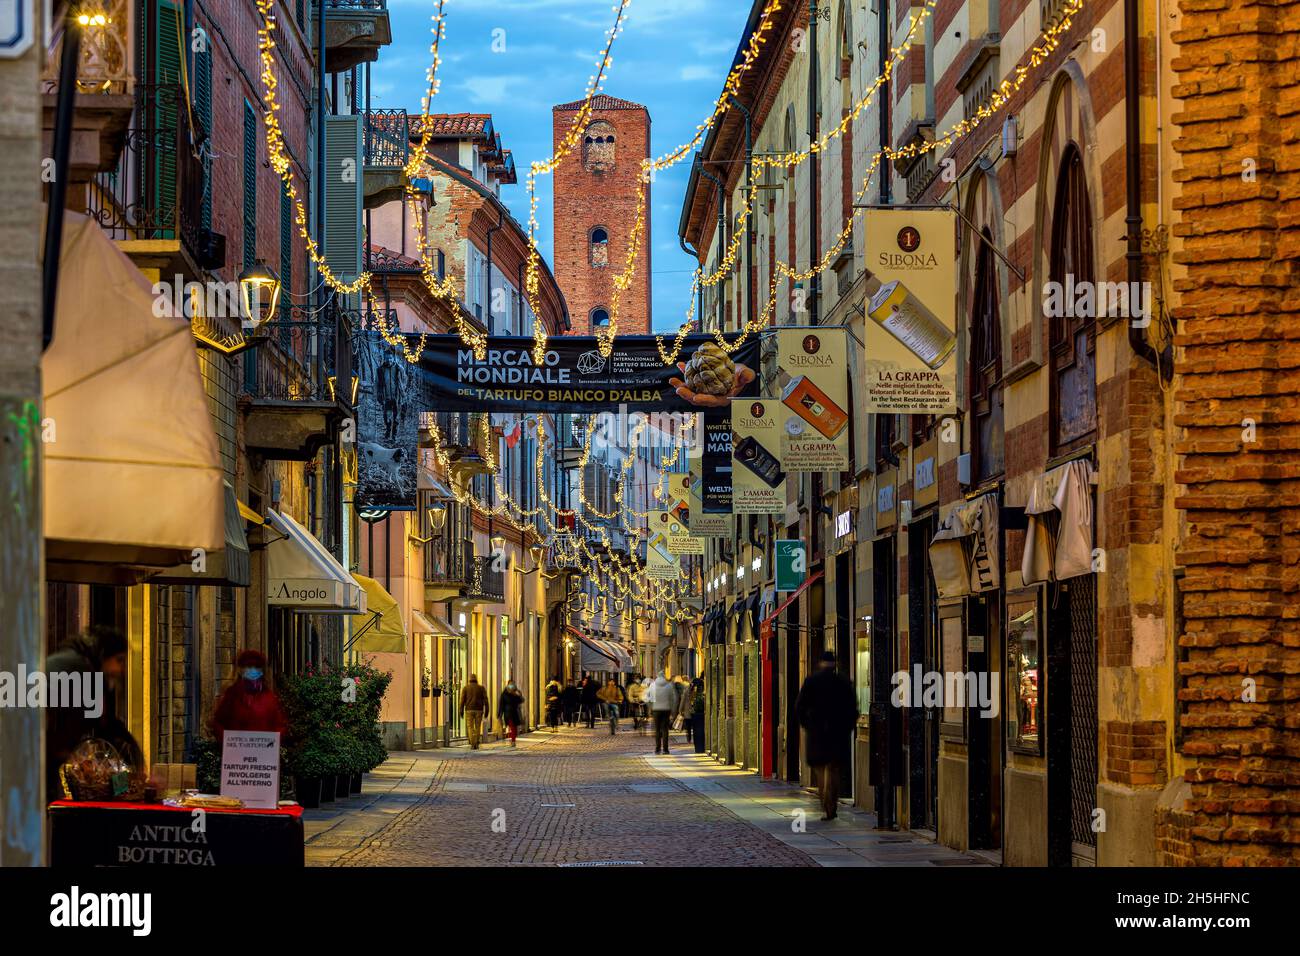 People walking on central street illuminated by Christmas lights in the evening in old town of Alba, Piedmont, Northern Italy. Stock Photo